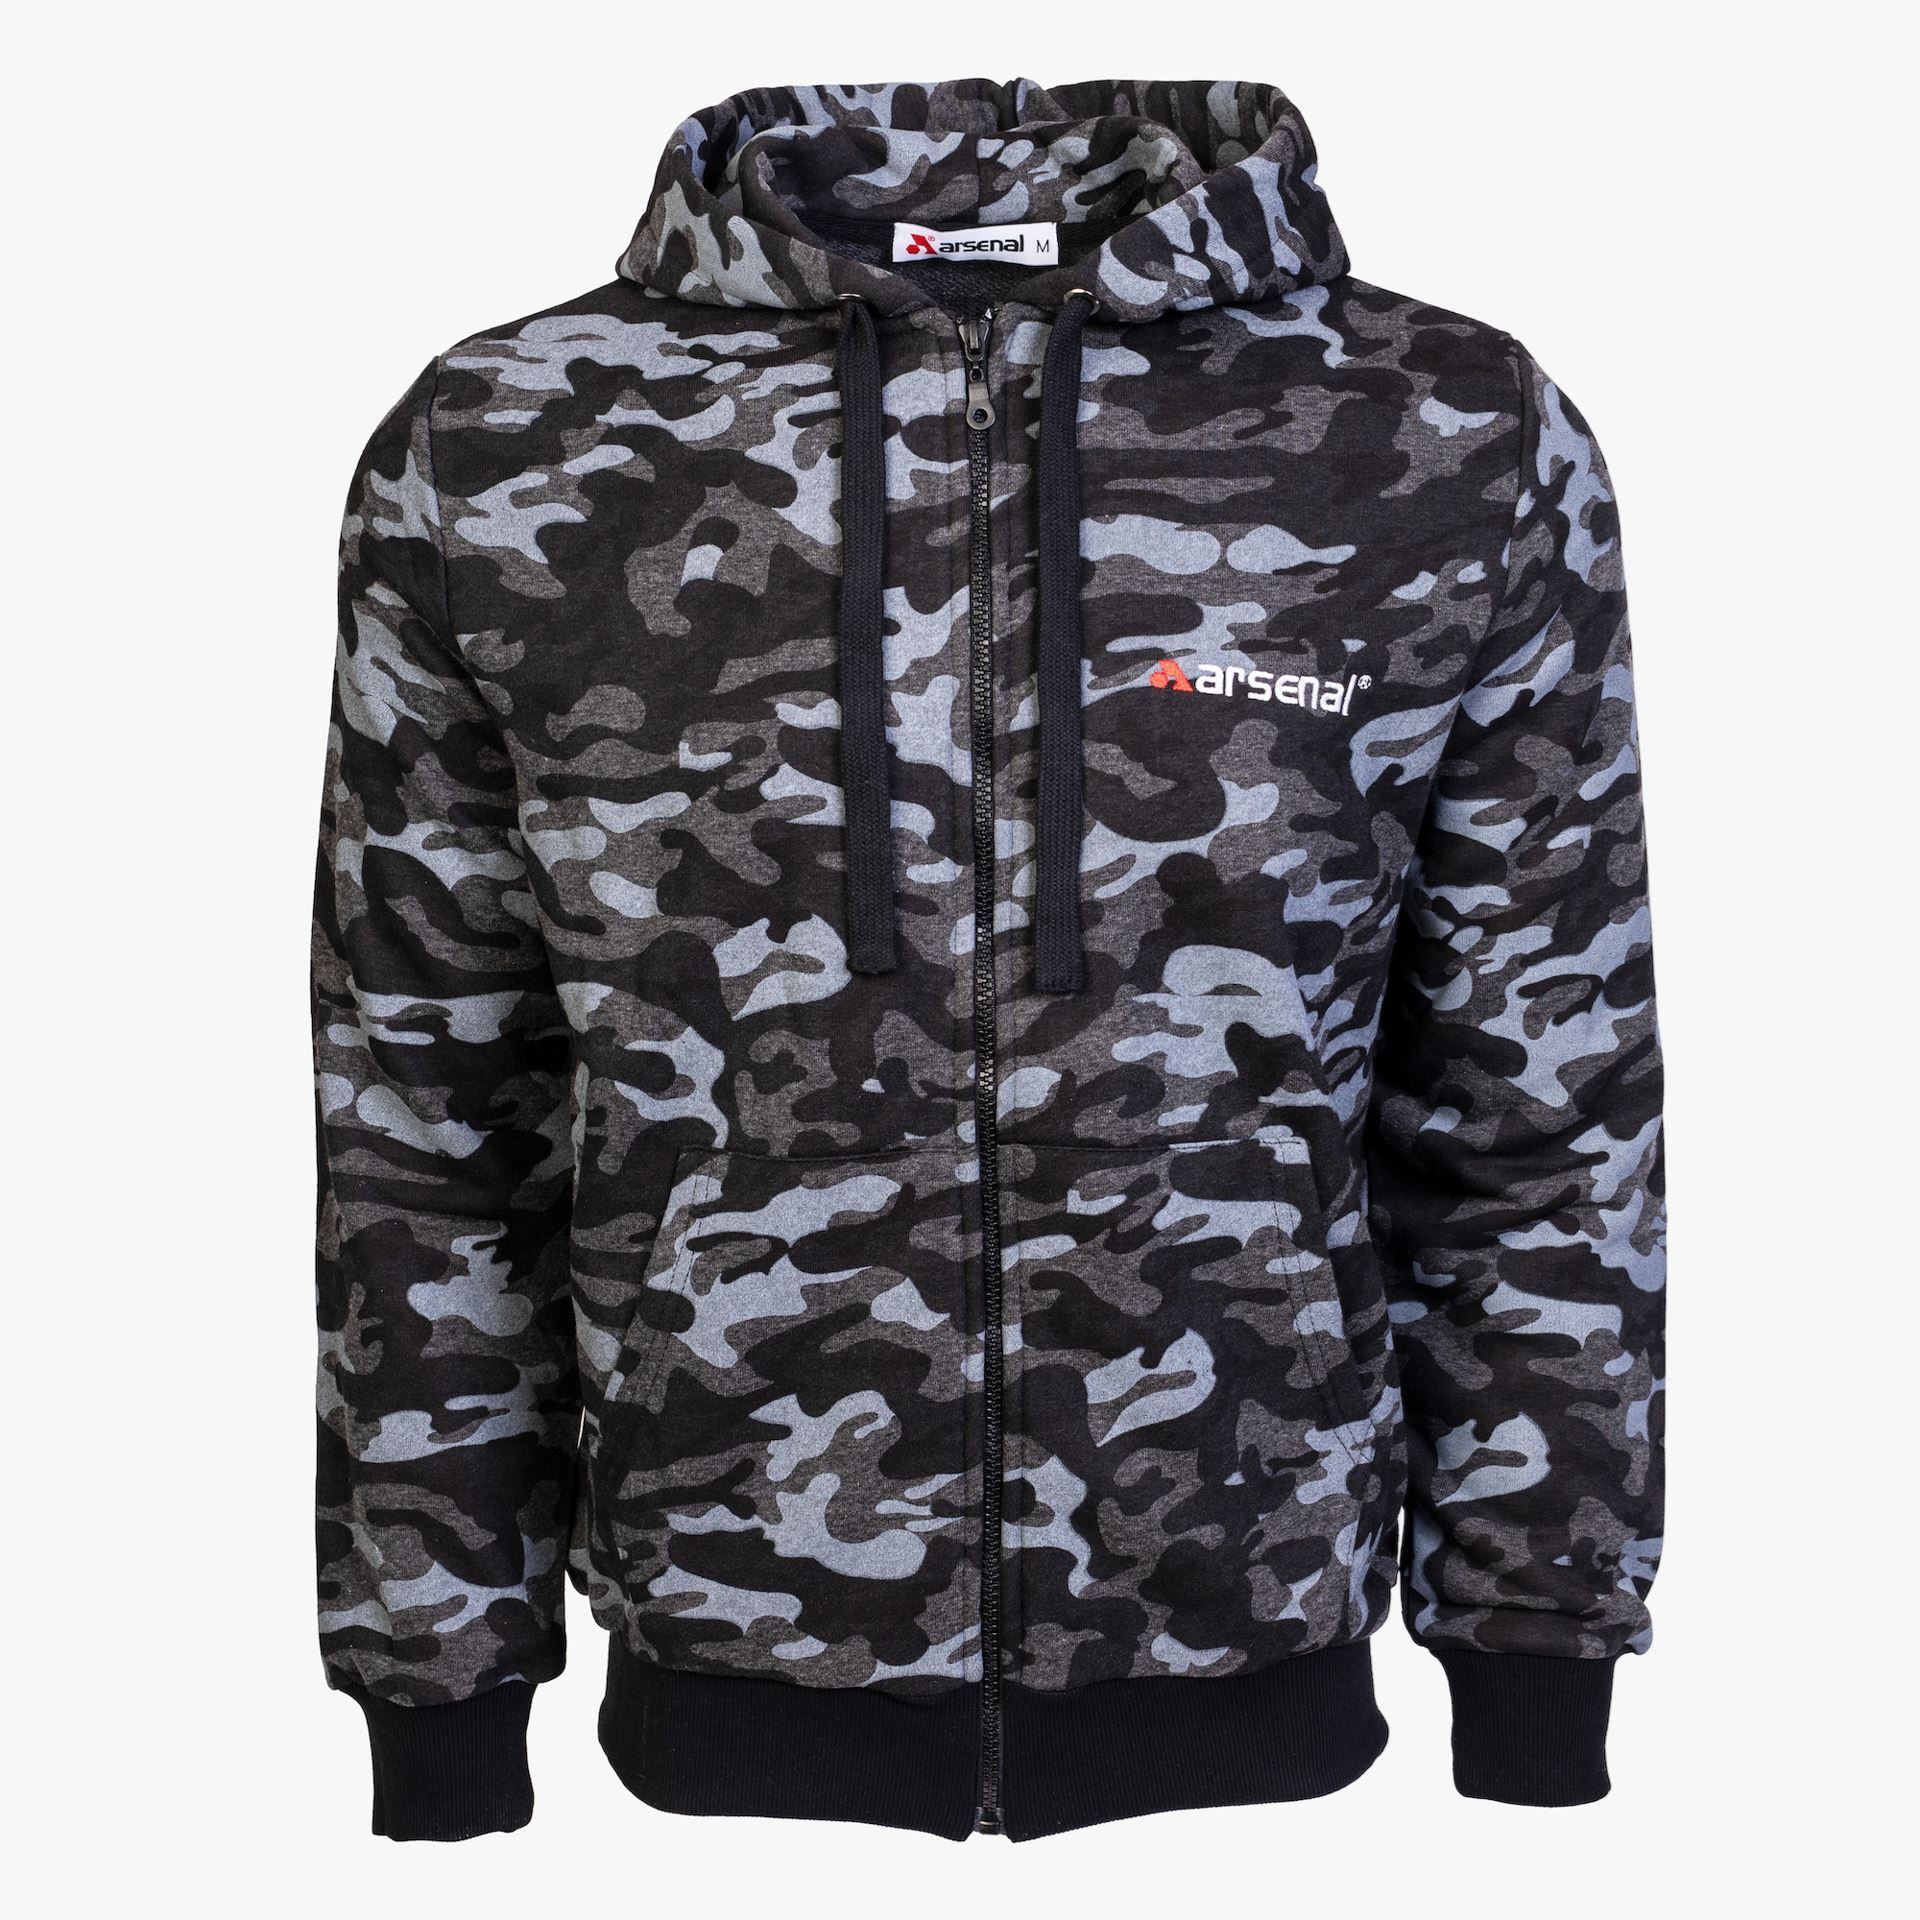 Arsenal Black Camo Cotton-Poly Relaxed Fit Zip-Up Hoodie at K-Var